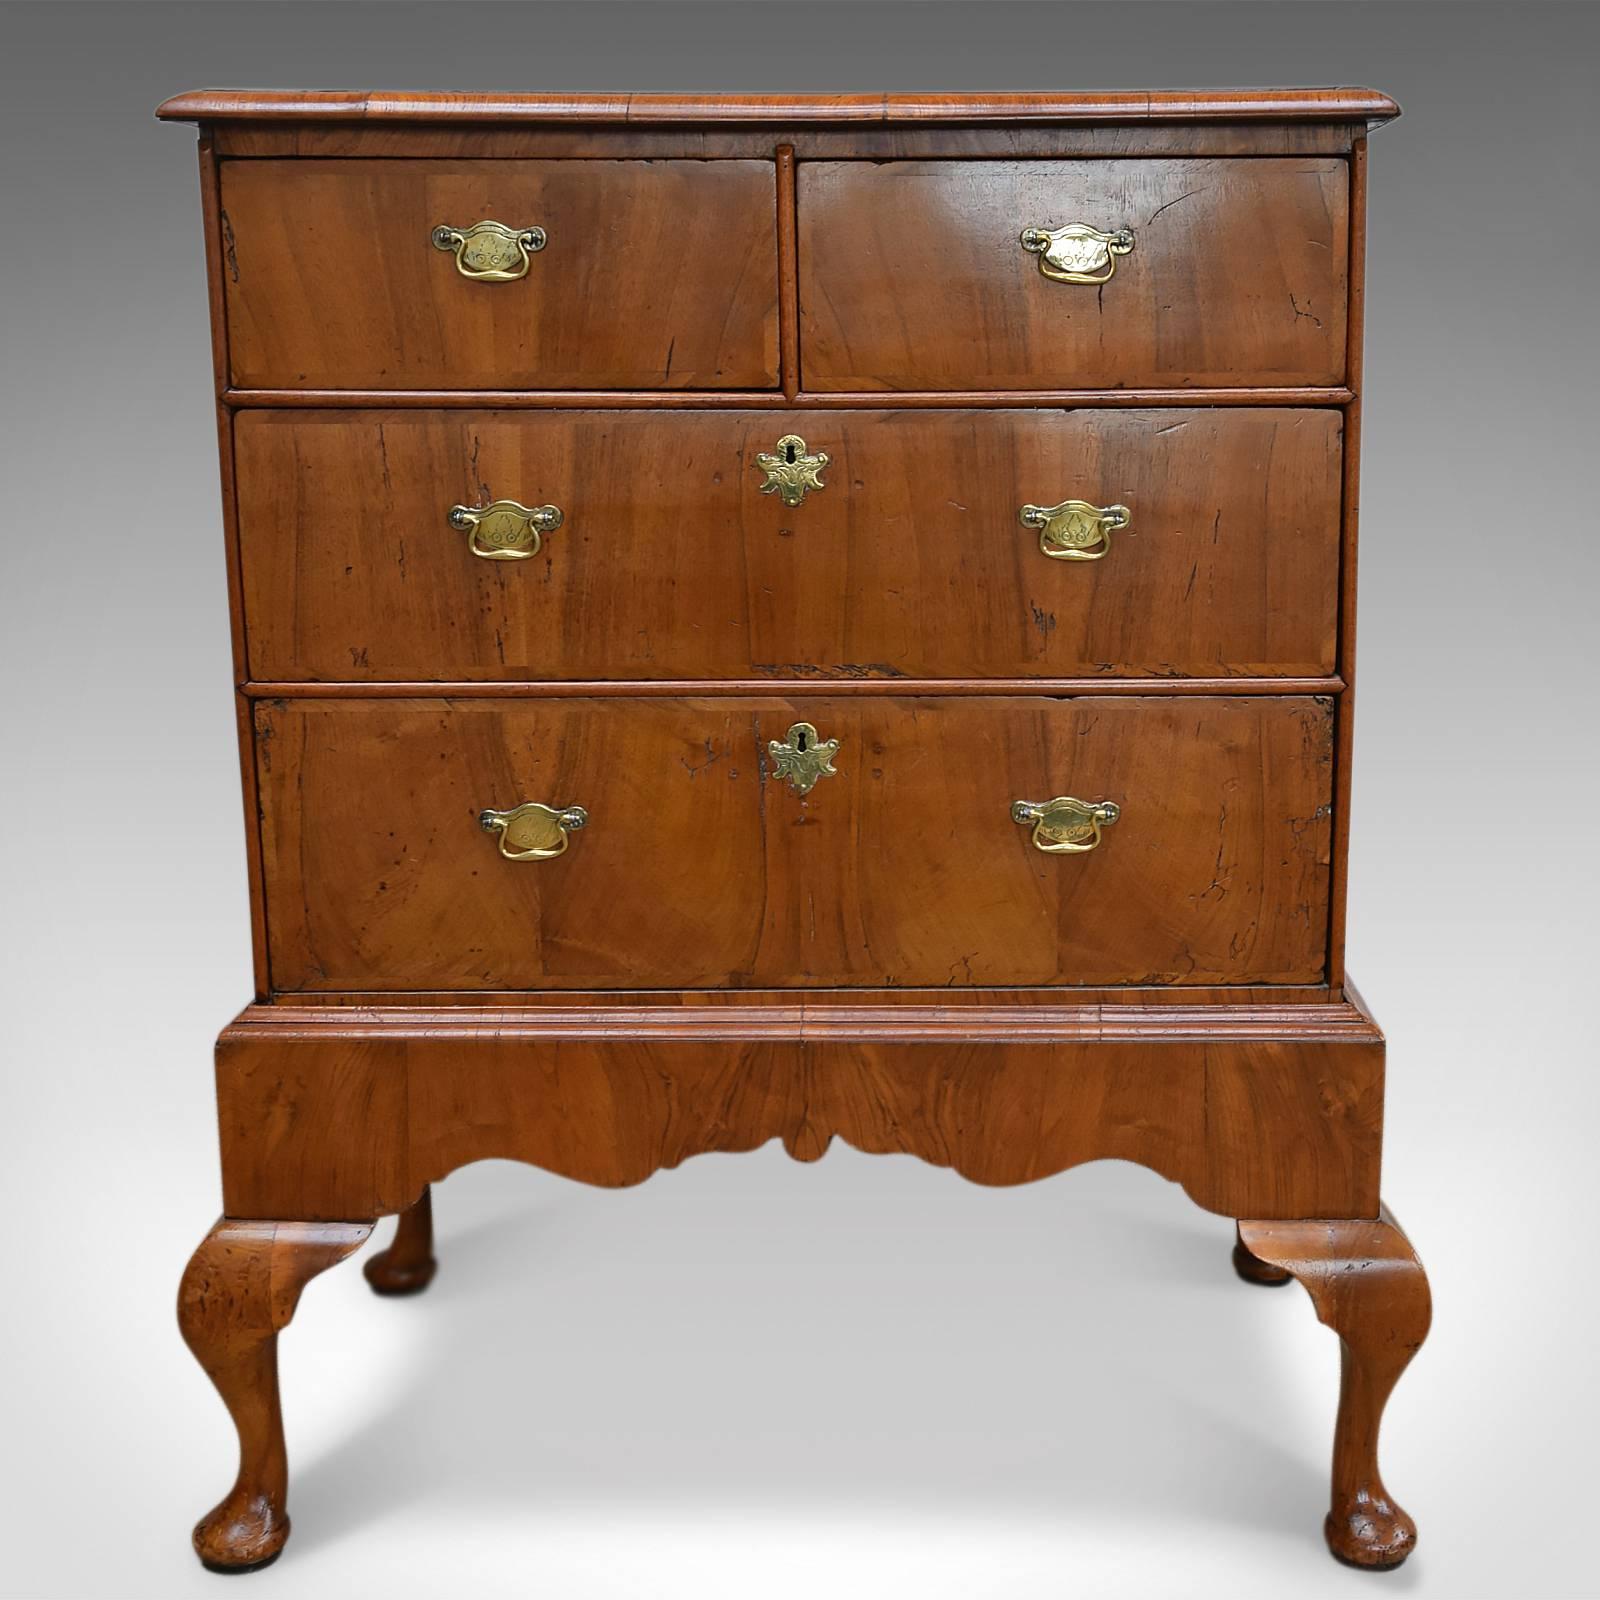 This is an antique chest on stand dating to the early Georgian period, circa 1720.

Rare to find with a desirable aged patina
Burr walnut top with grain interest
Double cross banded with edge moulding
Two over two drawer configuration
Walnut